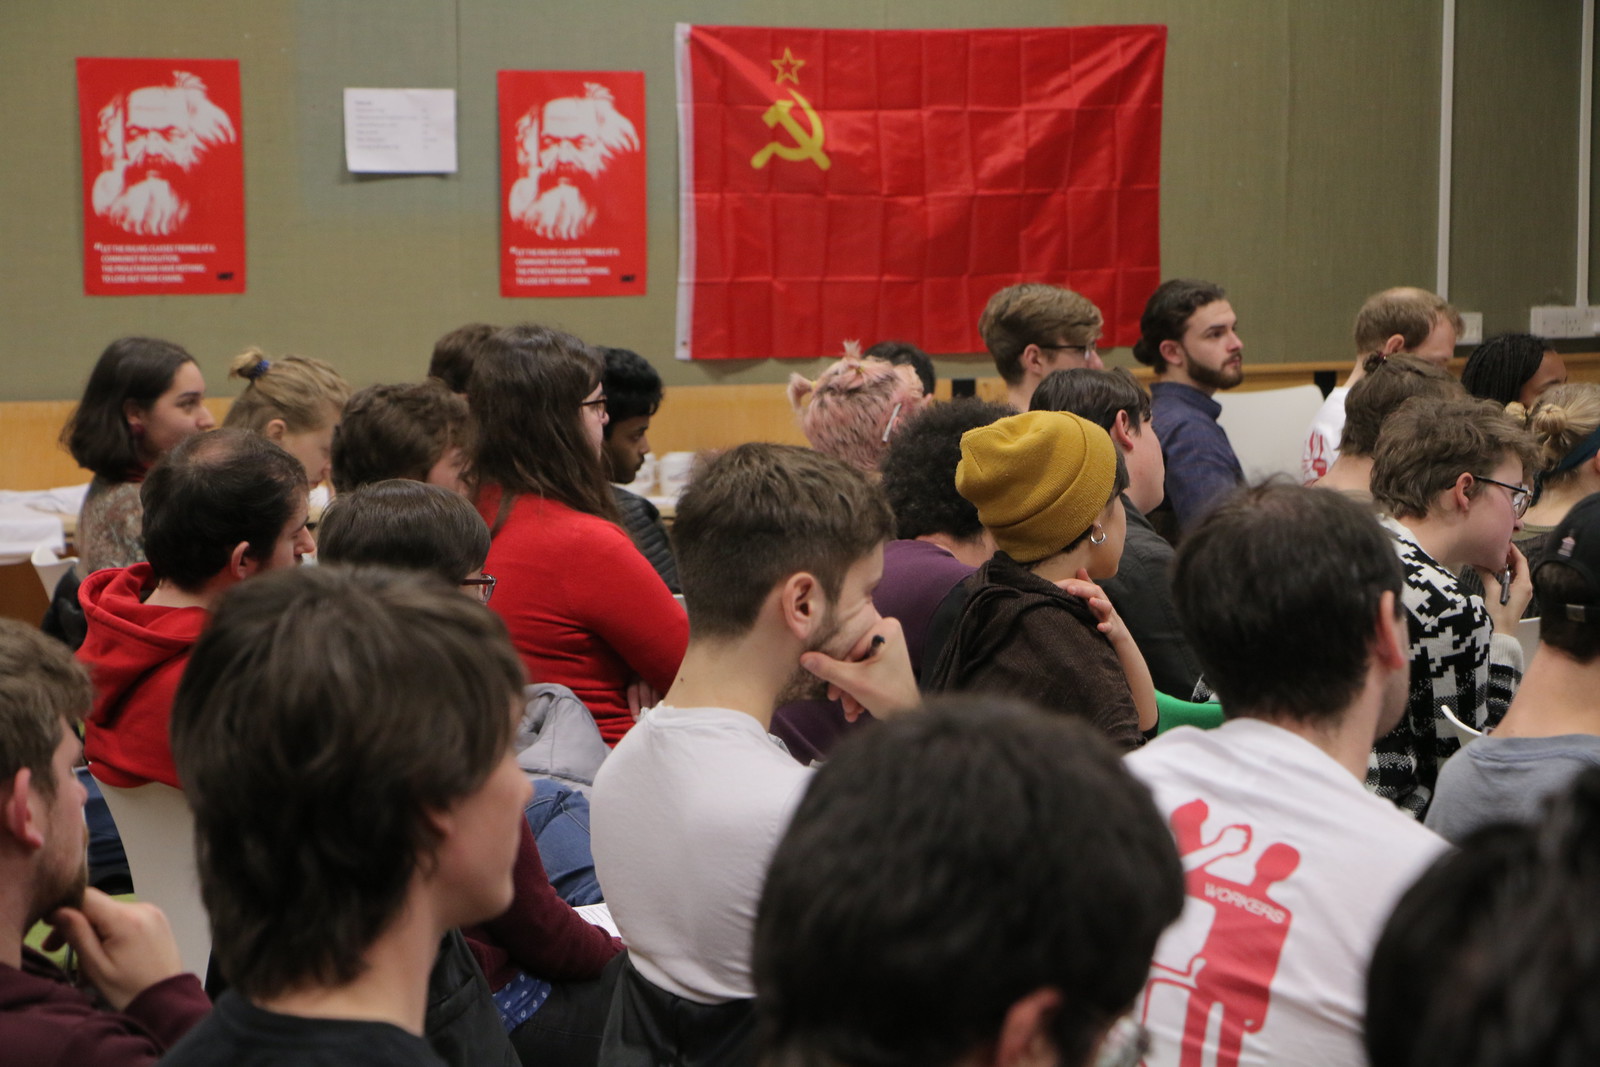 Marxist Student Federation conference 2019